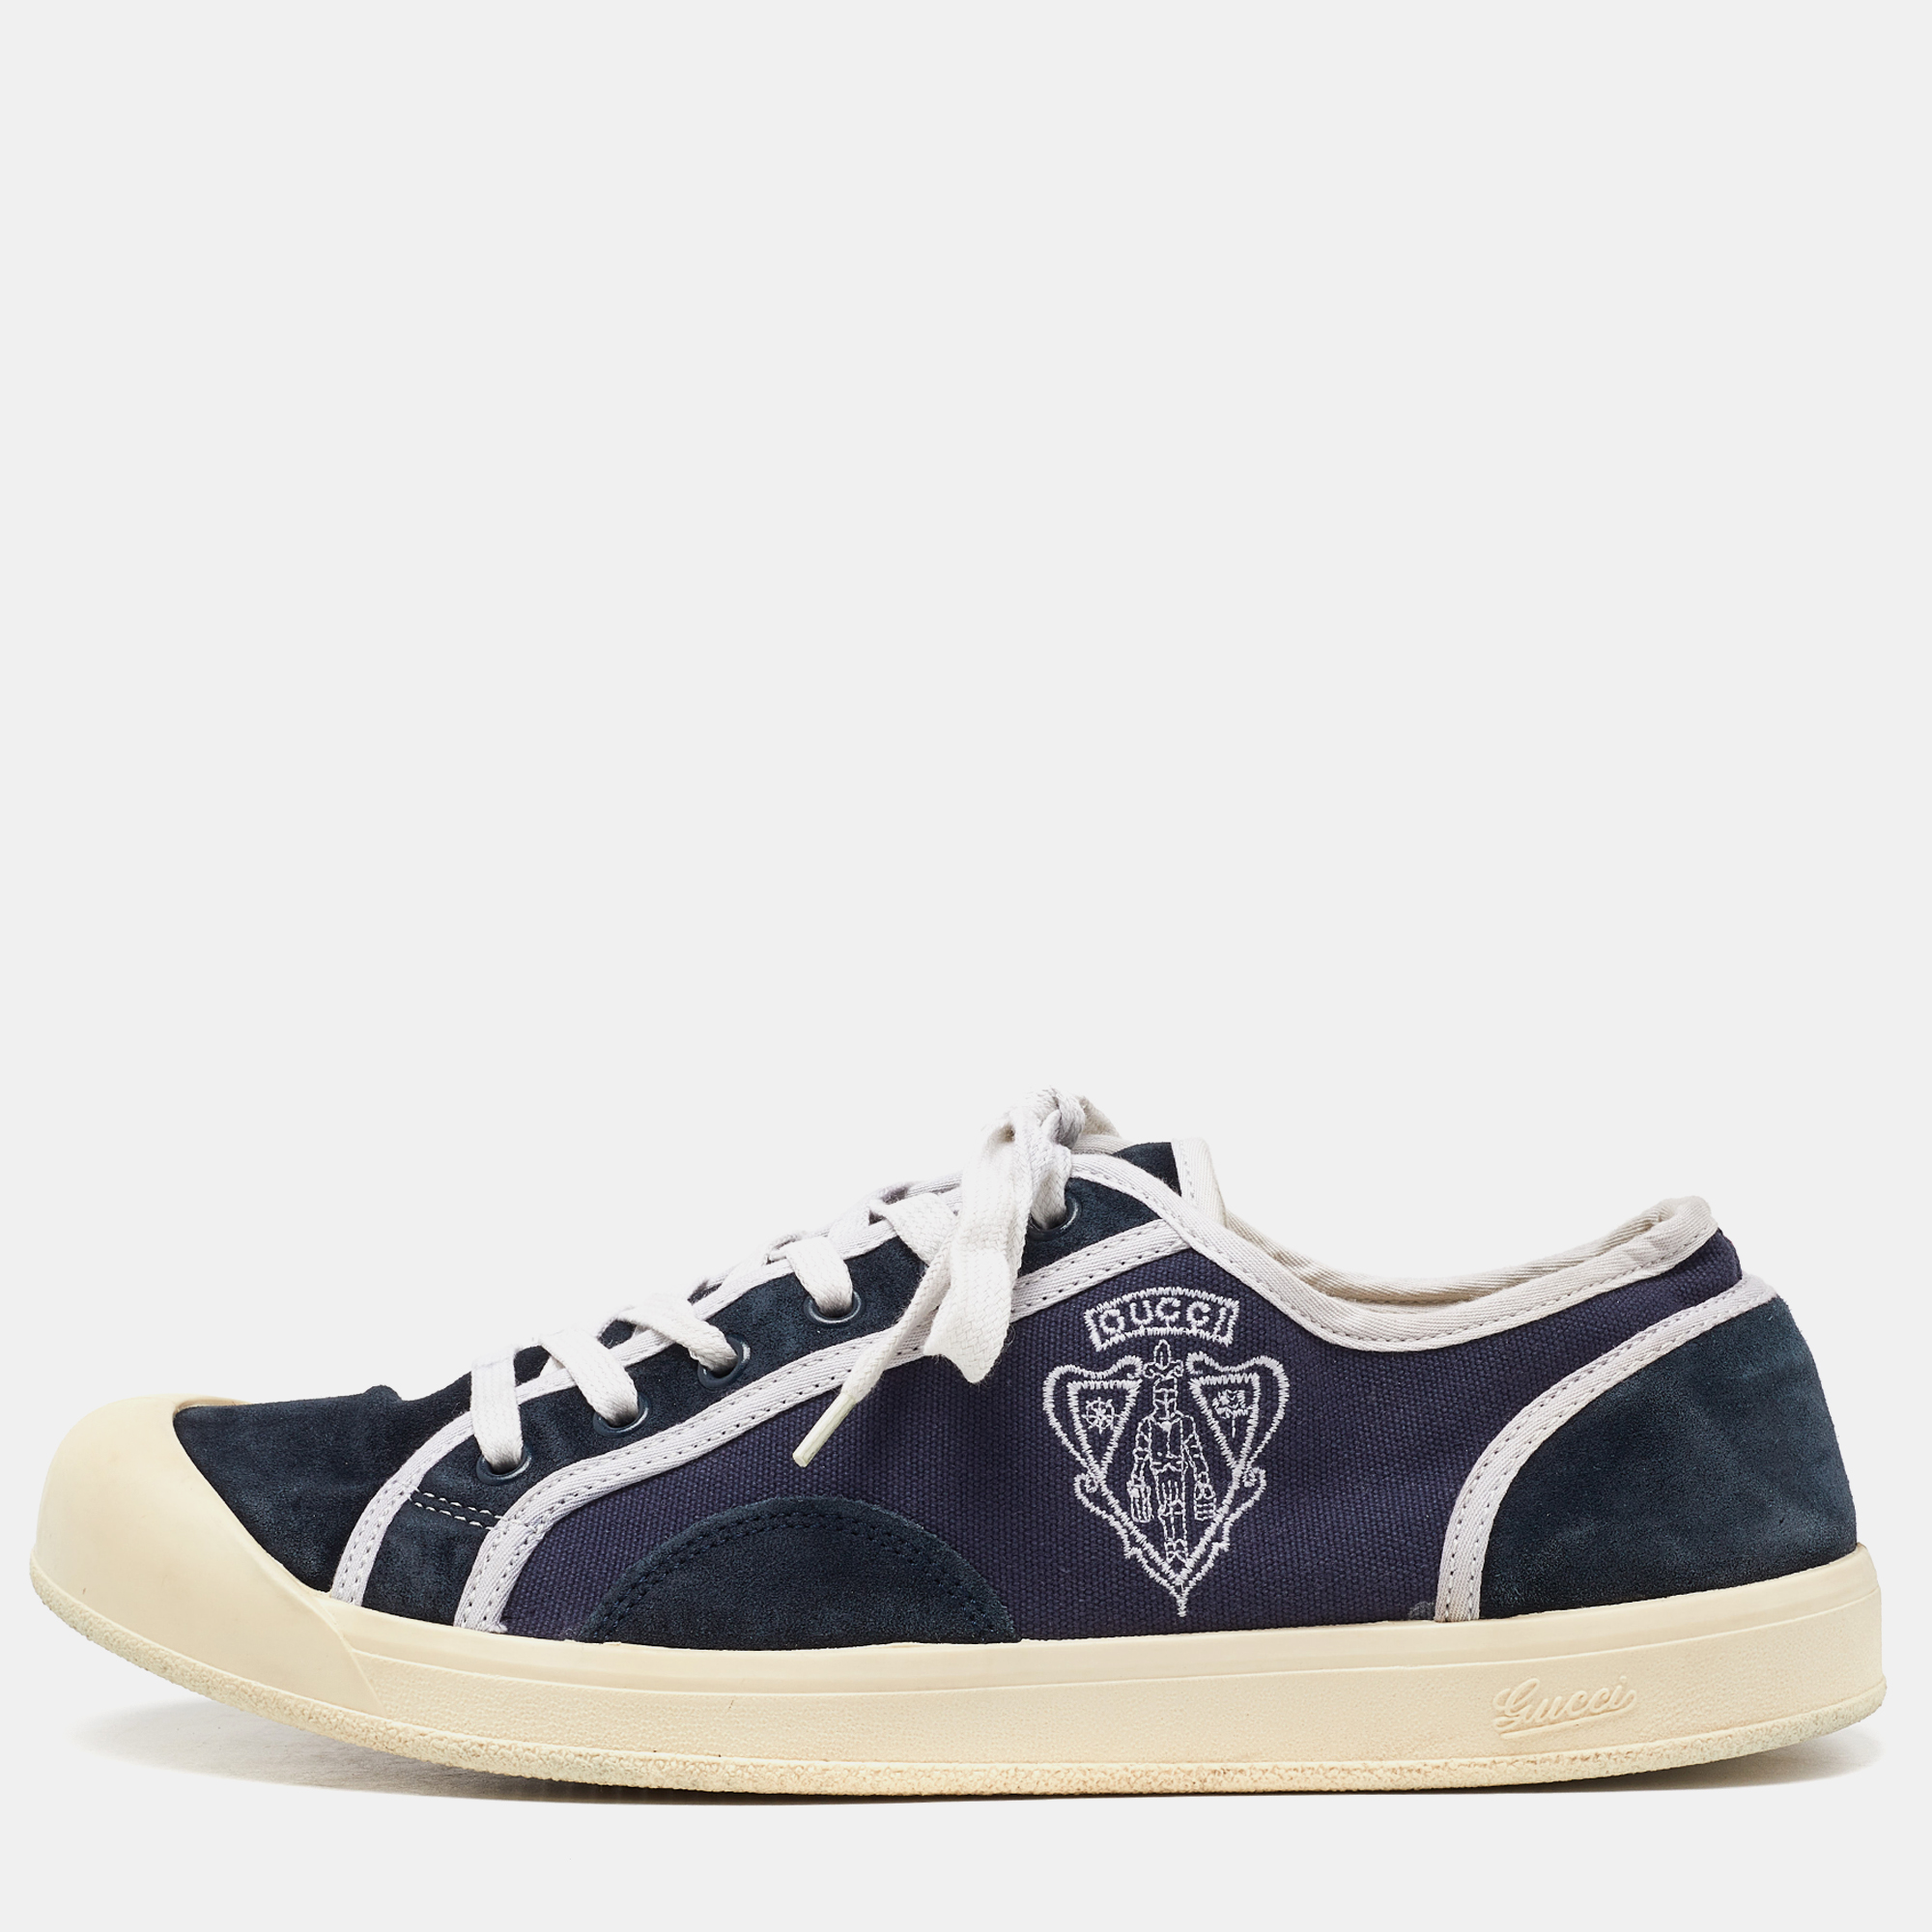 Gucci navy blue canvas and suede signature crest sneakers size 42